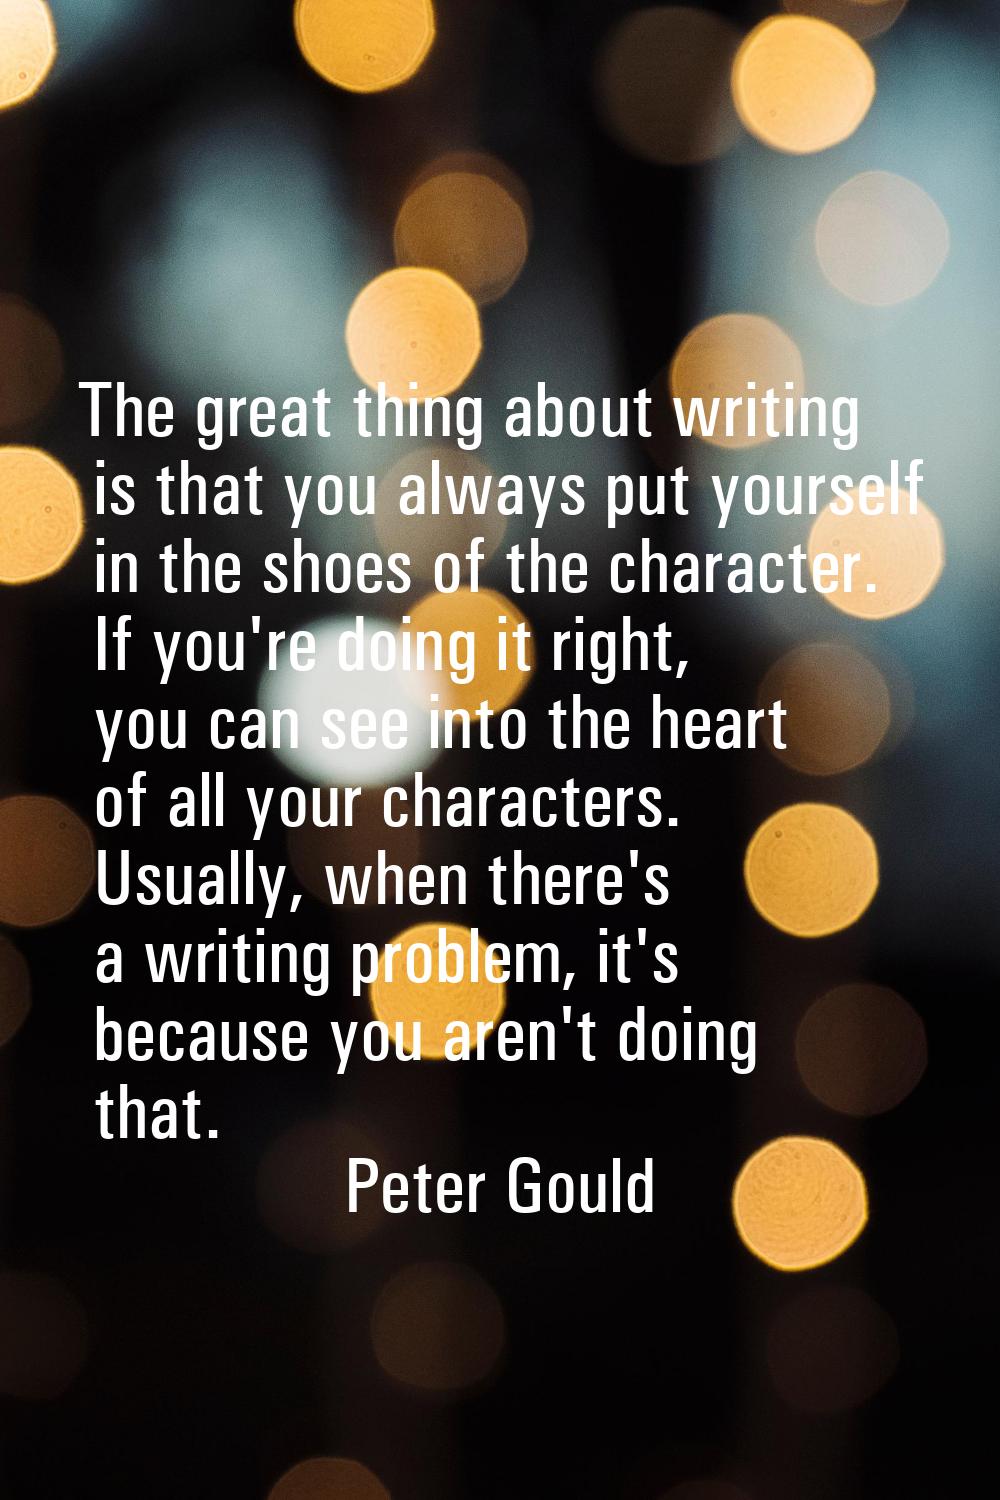 The great thing about writing is that you always put yourself in the shoes of the character. If you